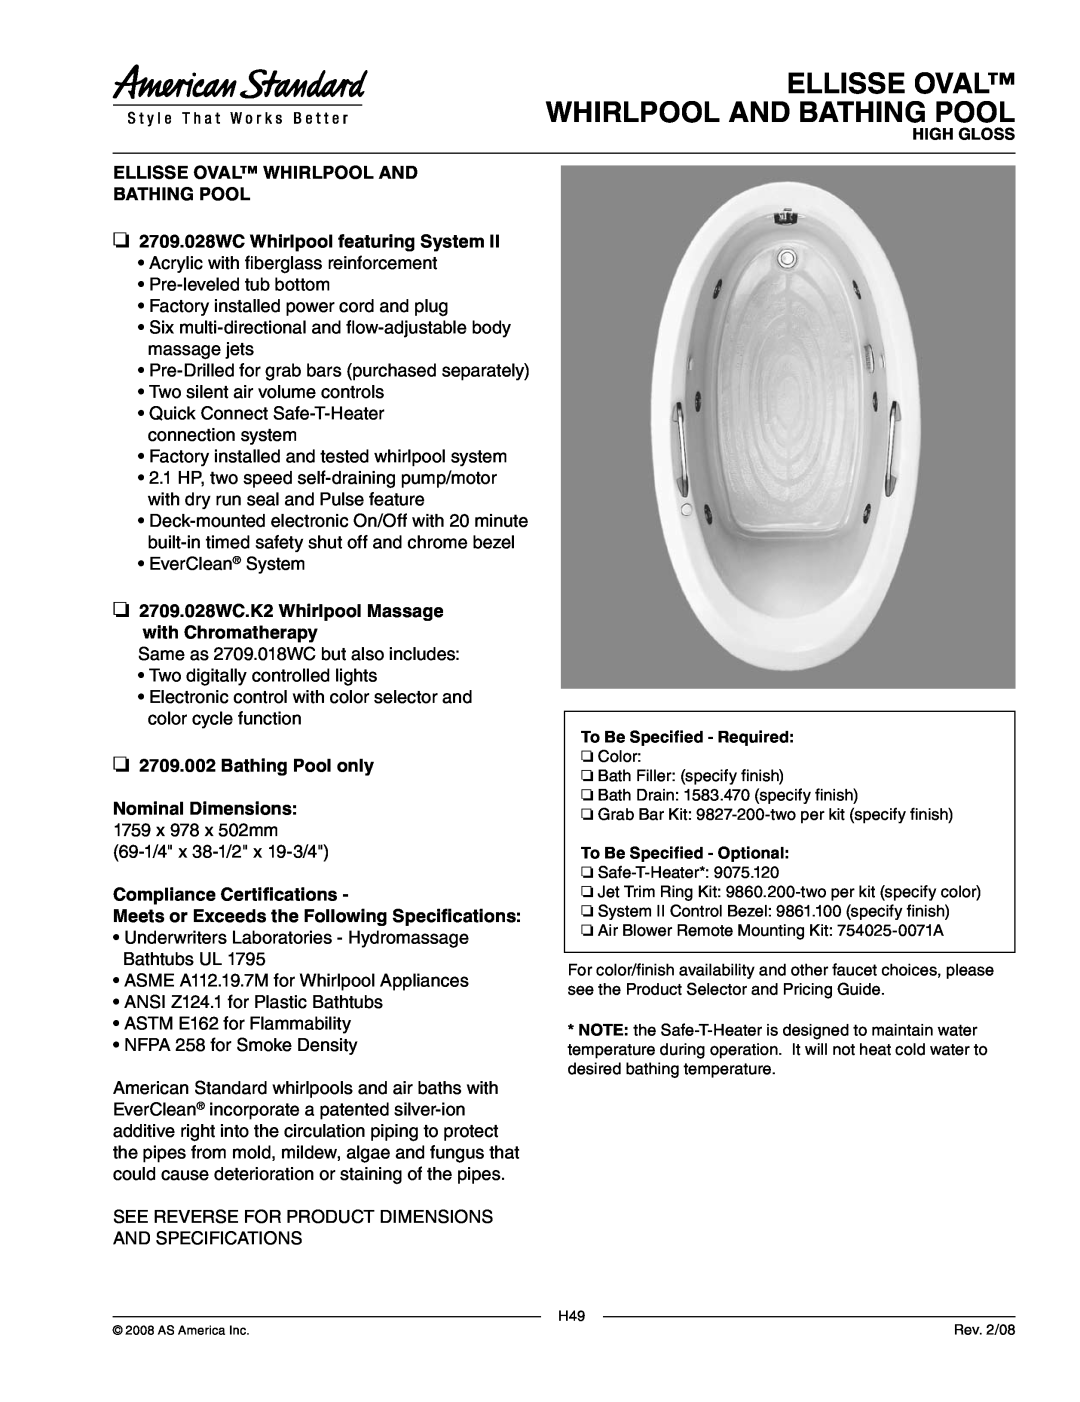 American Standard 2709.028WC.K2 dimensions Ellisse Oval Whirlpool And Bathing Pool, 2709.028WC Whirlpool featuring System 